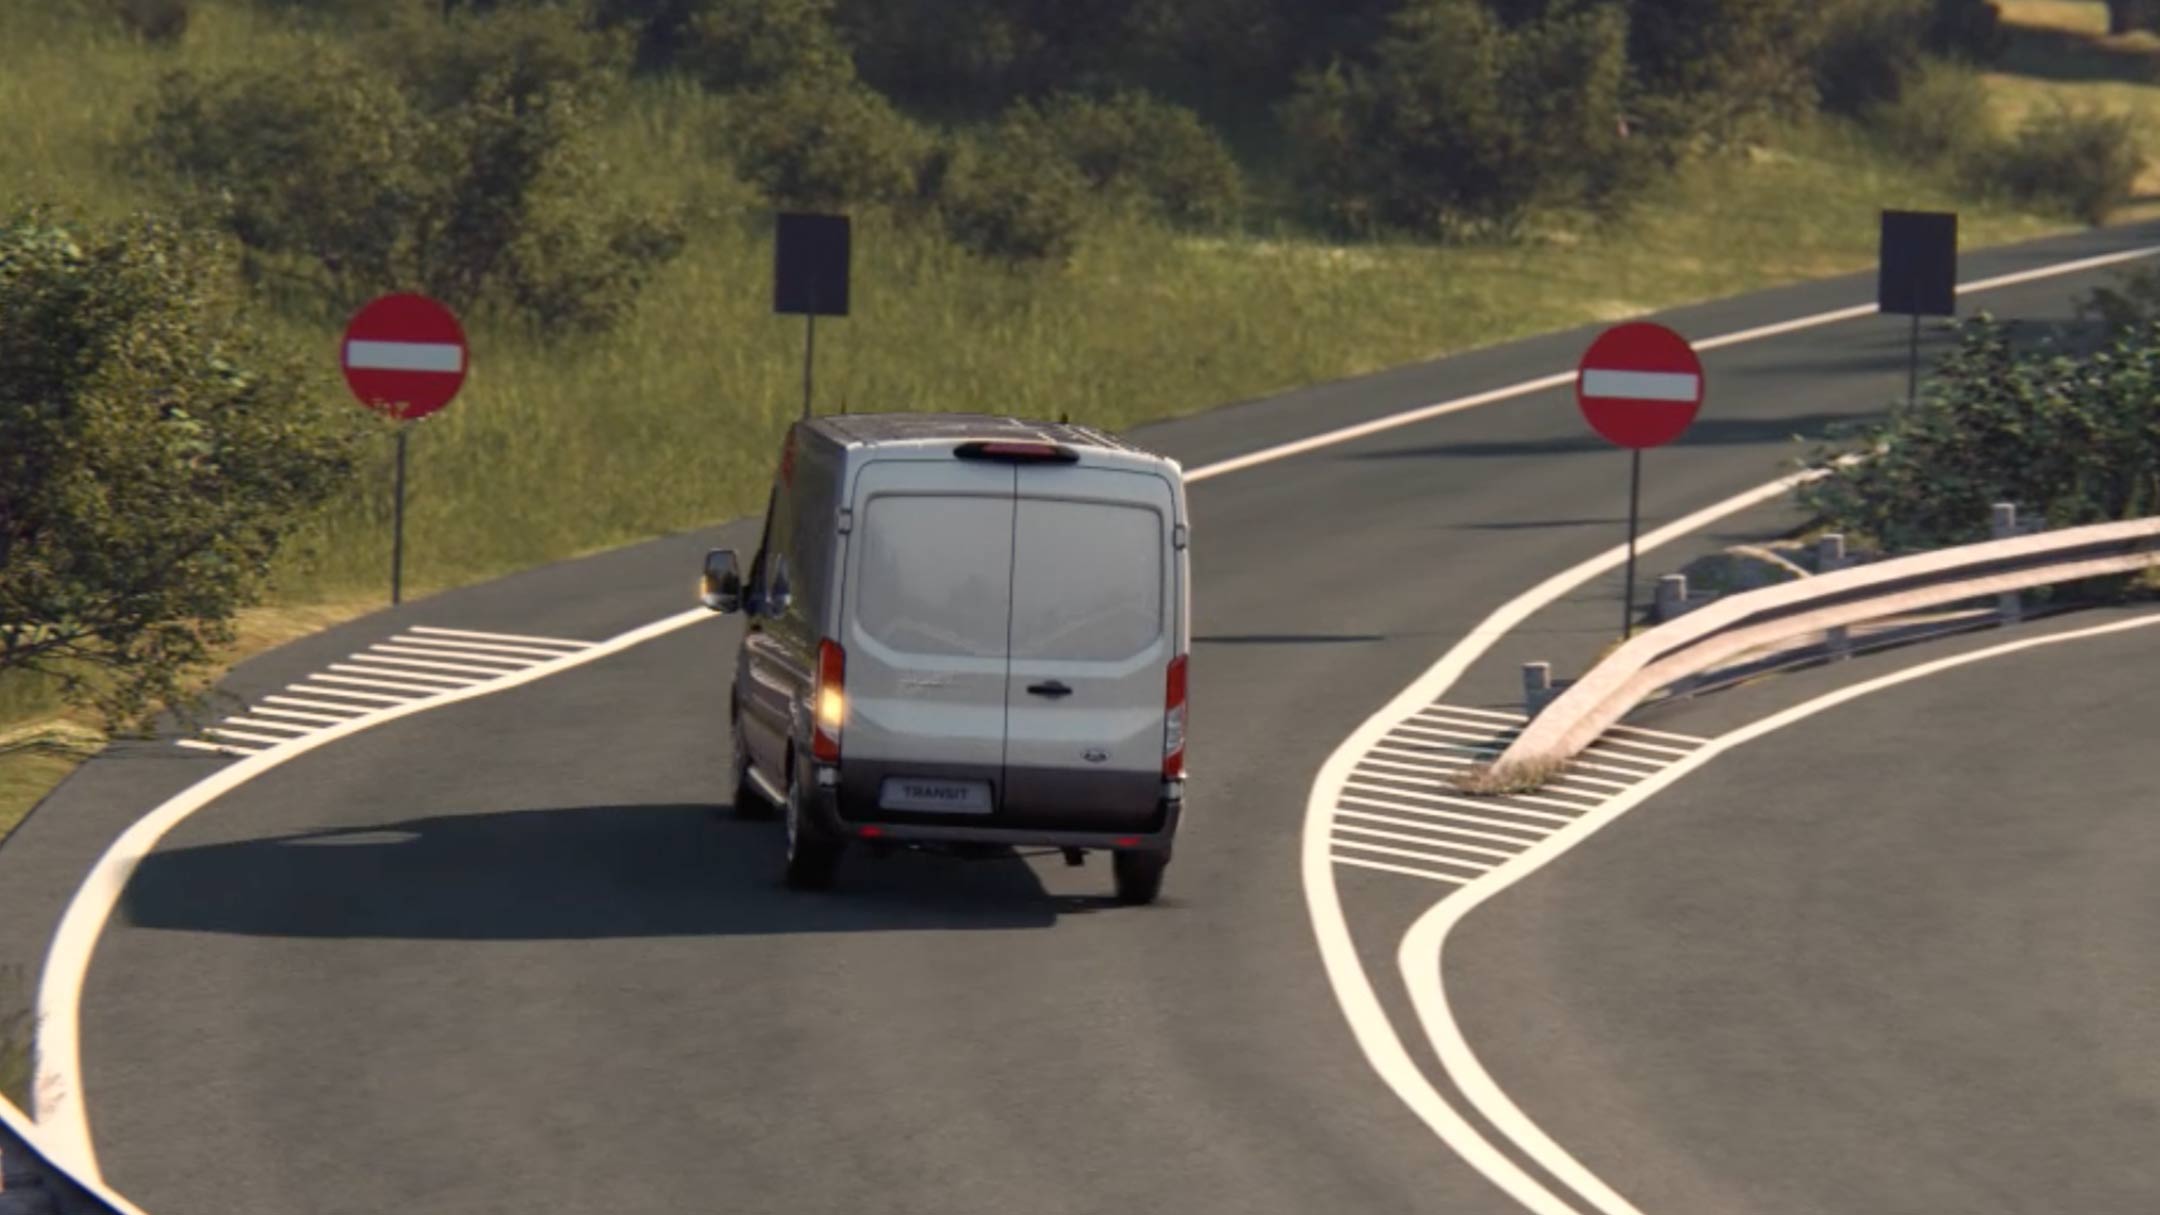 Ford Transit Minibus driving the wrong way